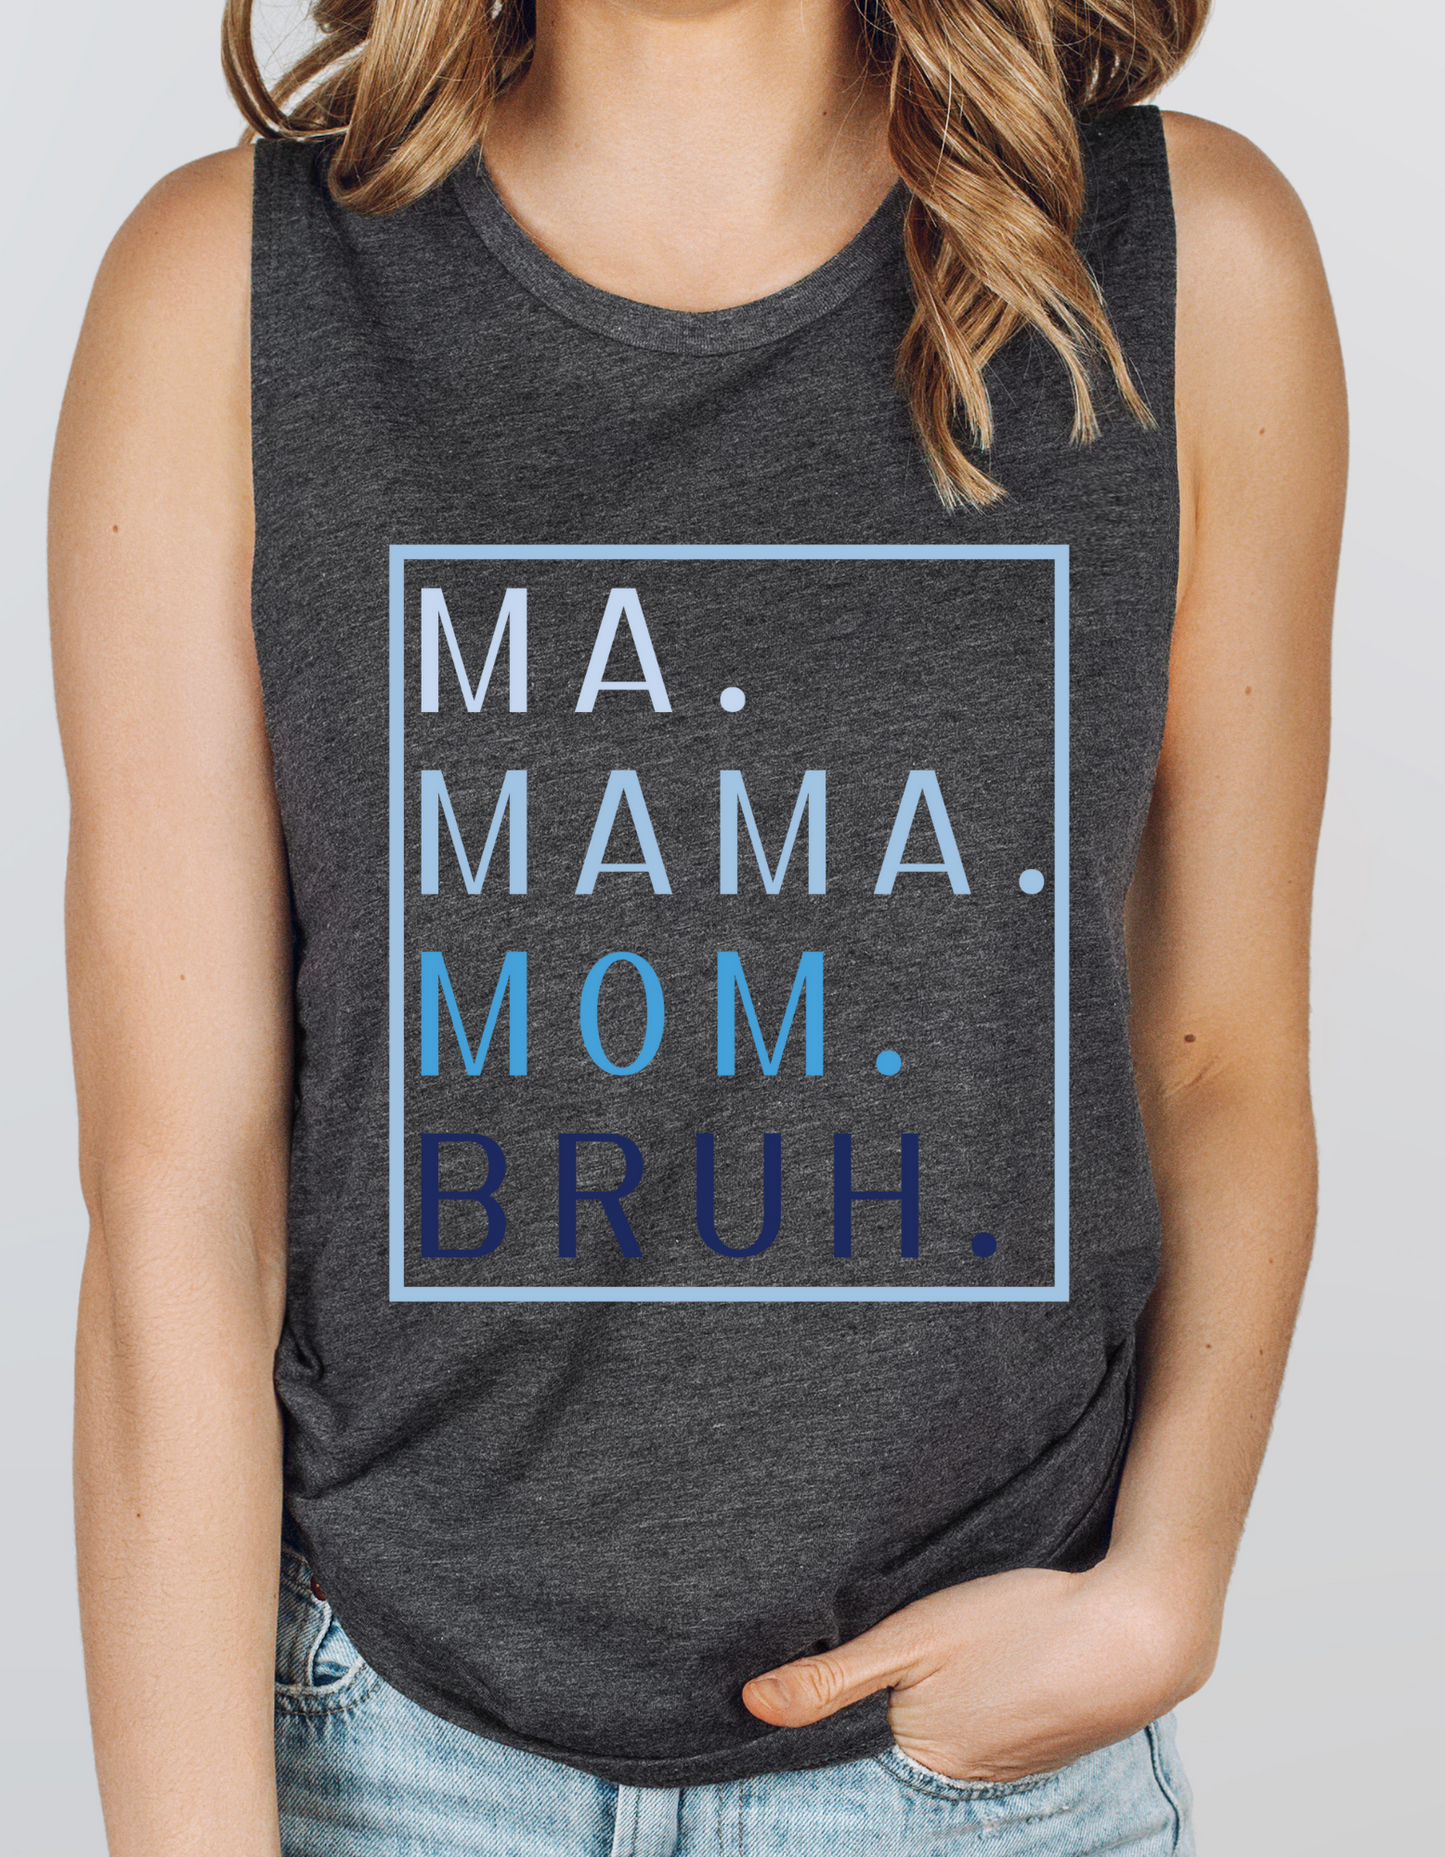 Gray festival tank with MA. MAMA. MOM. BRUH. printed vertically on top of each other in varying shades of blue. The lightest shade of blue is at the top. Then there is a light blue box around the print as well.